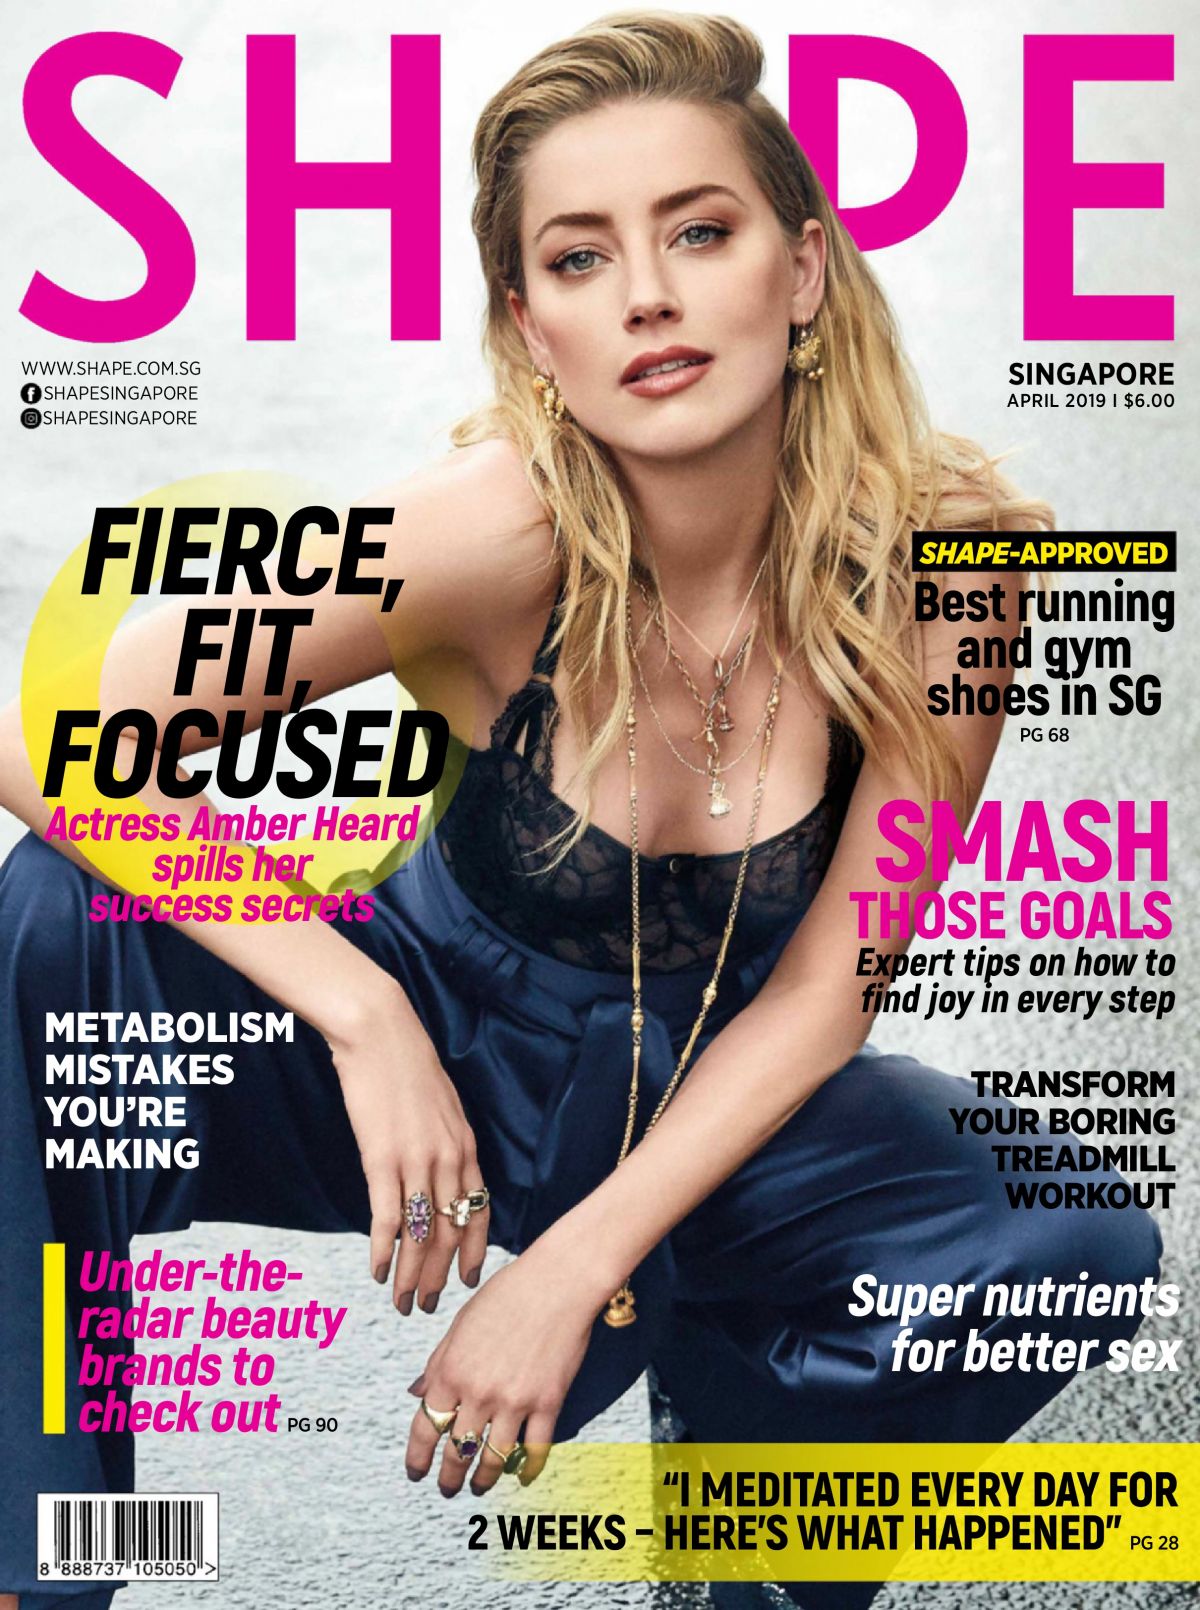 Get a Year of Shape Magazine for only $2.80 | All Things 